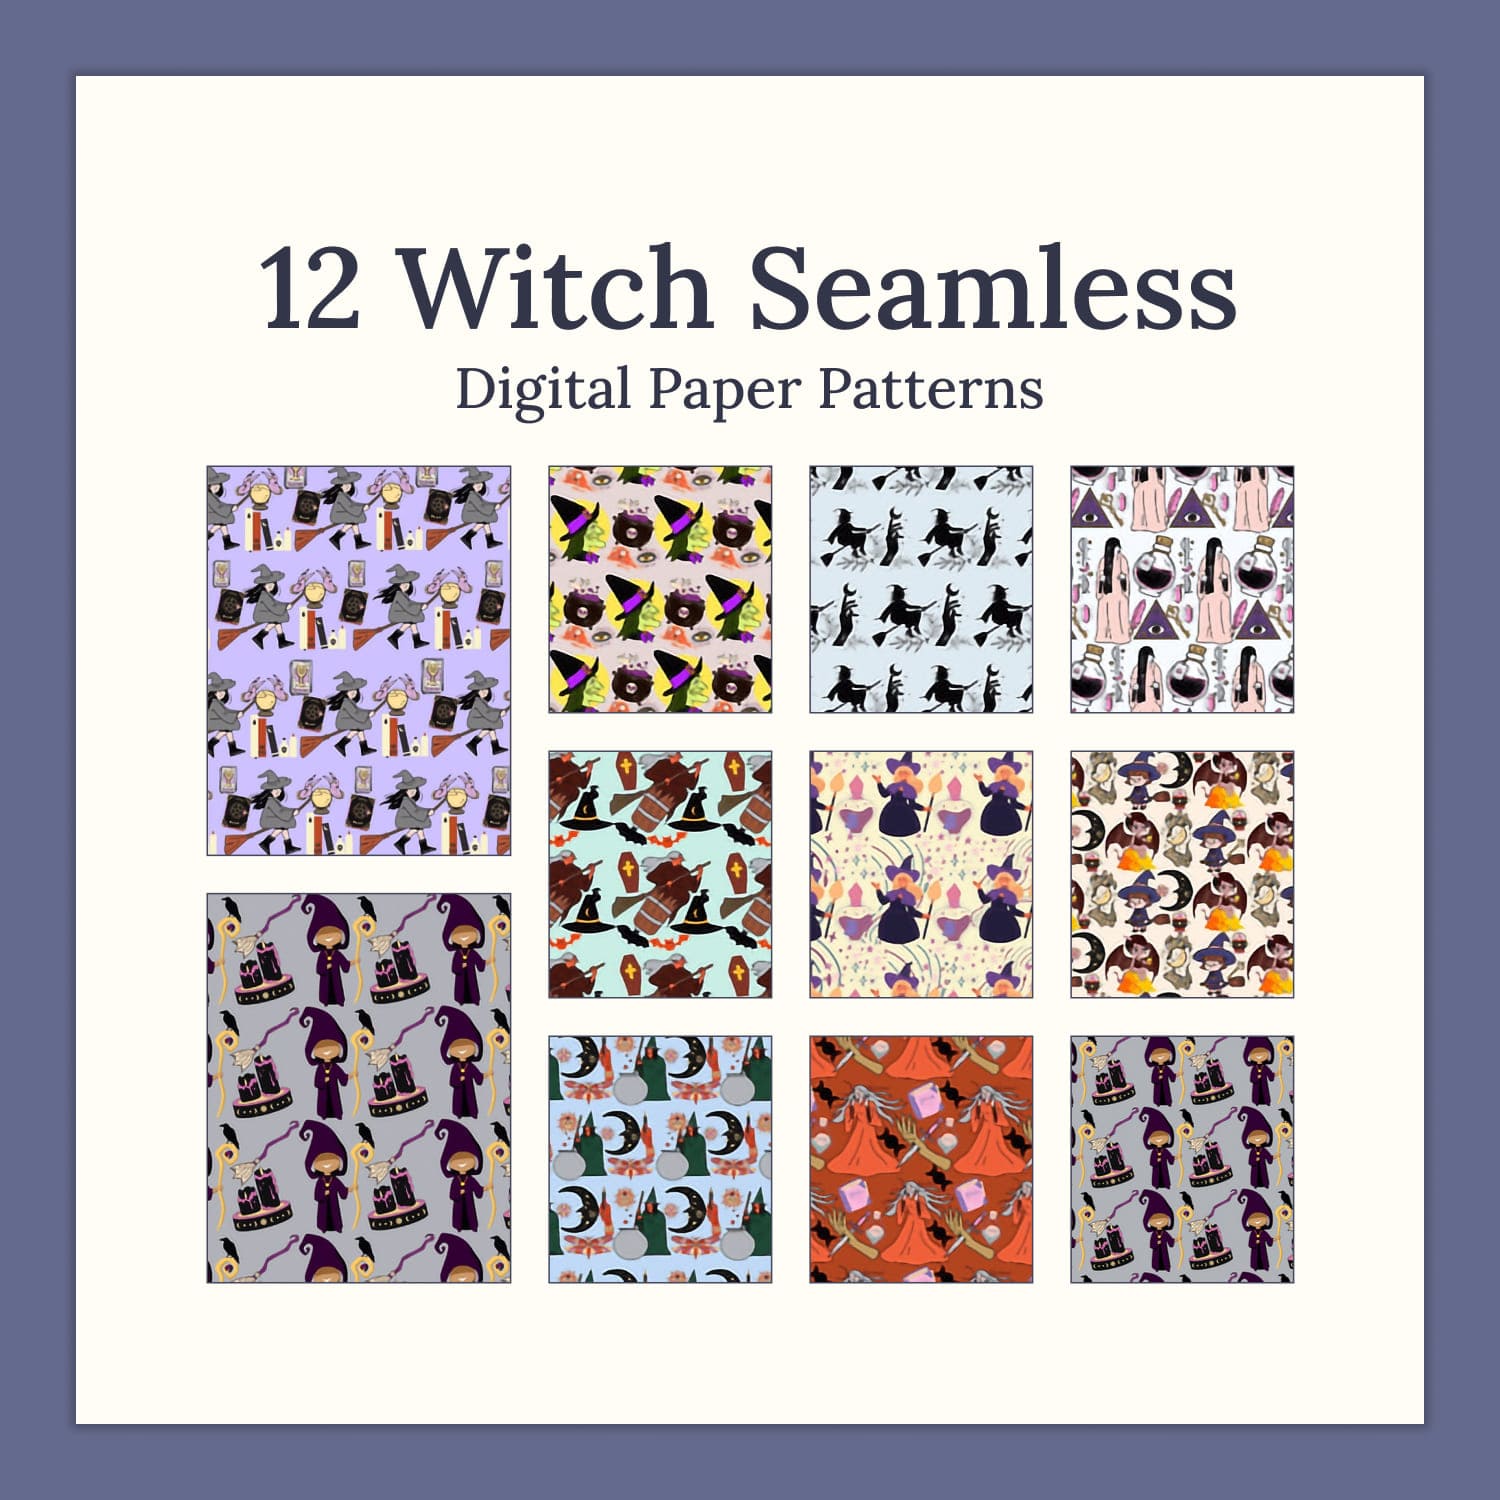 Witch cloaks, books about magic, magical brooms are depicted on 12 patterns.